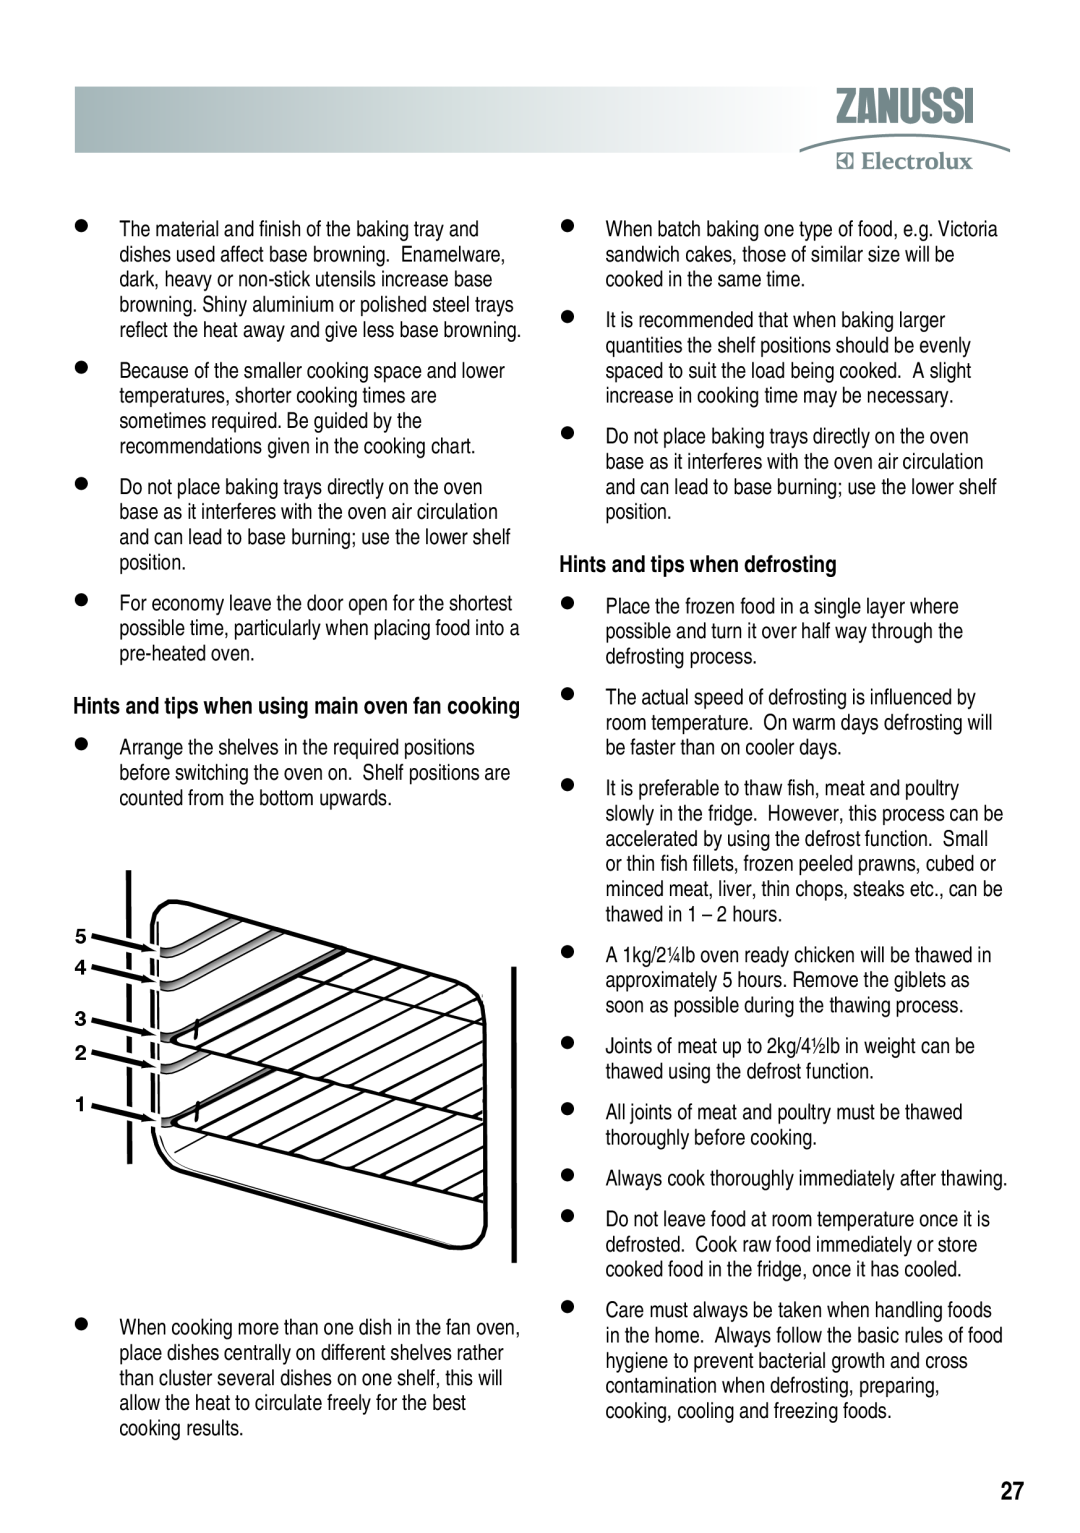 Zanussi ZKT6050 user manual Hints and tips when defrosting, Hints and tips when using main oven fan cooking 